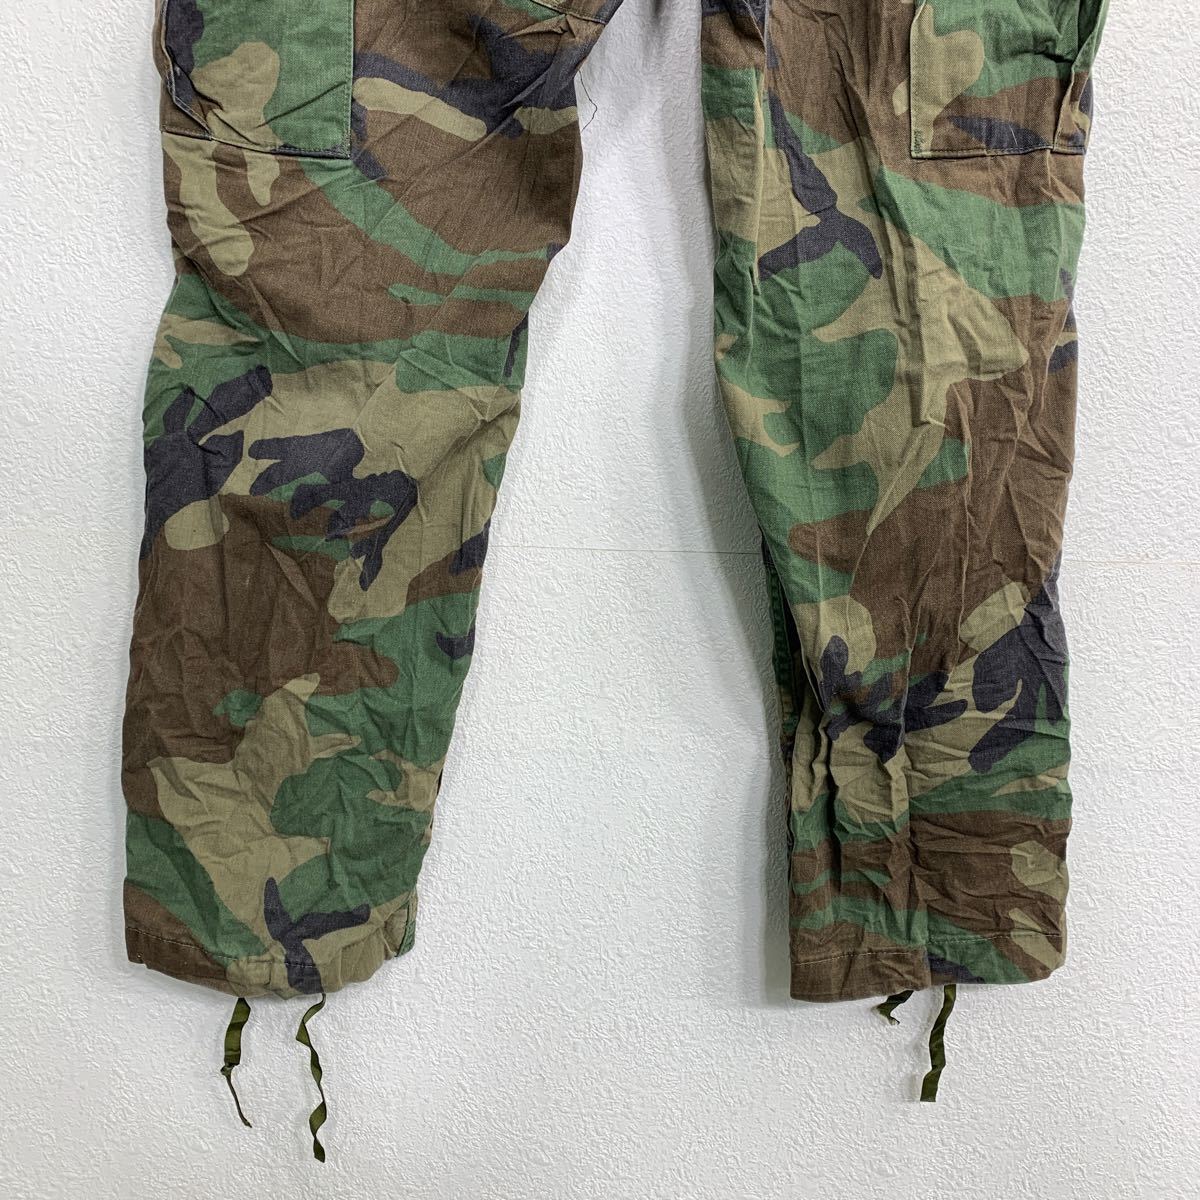  military trousers pants W31 button fly wood Land camouflage camouflage old clothes . America buying up 2402-218